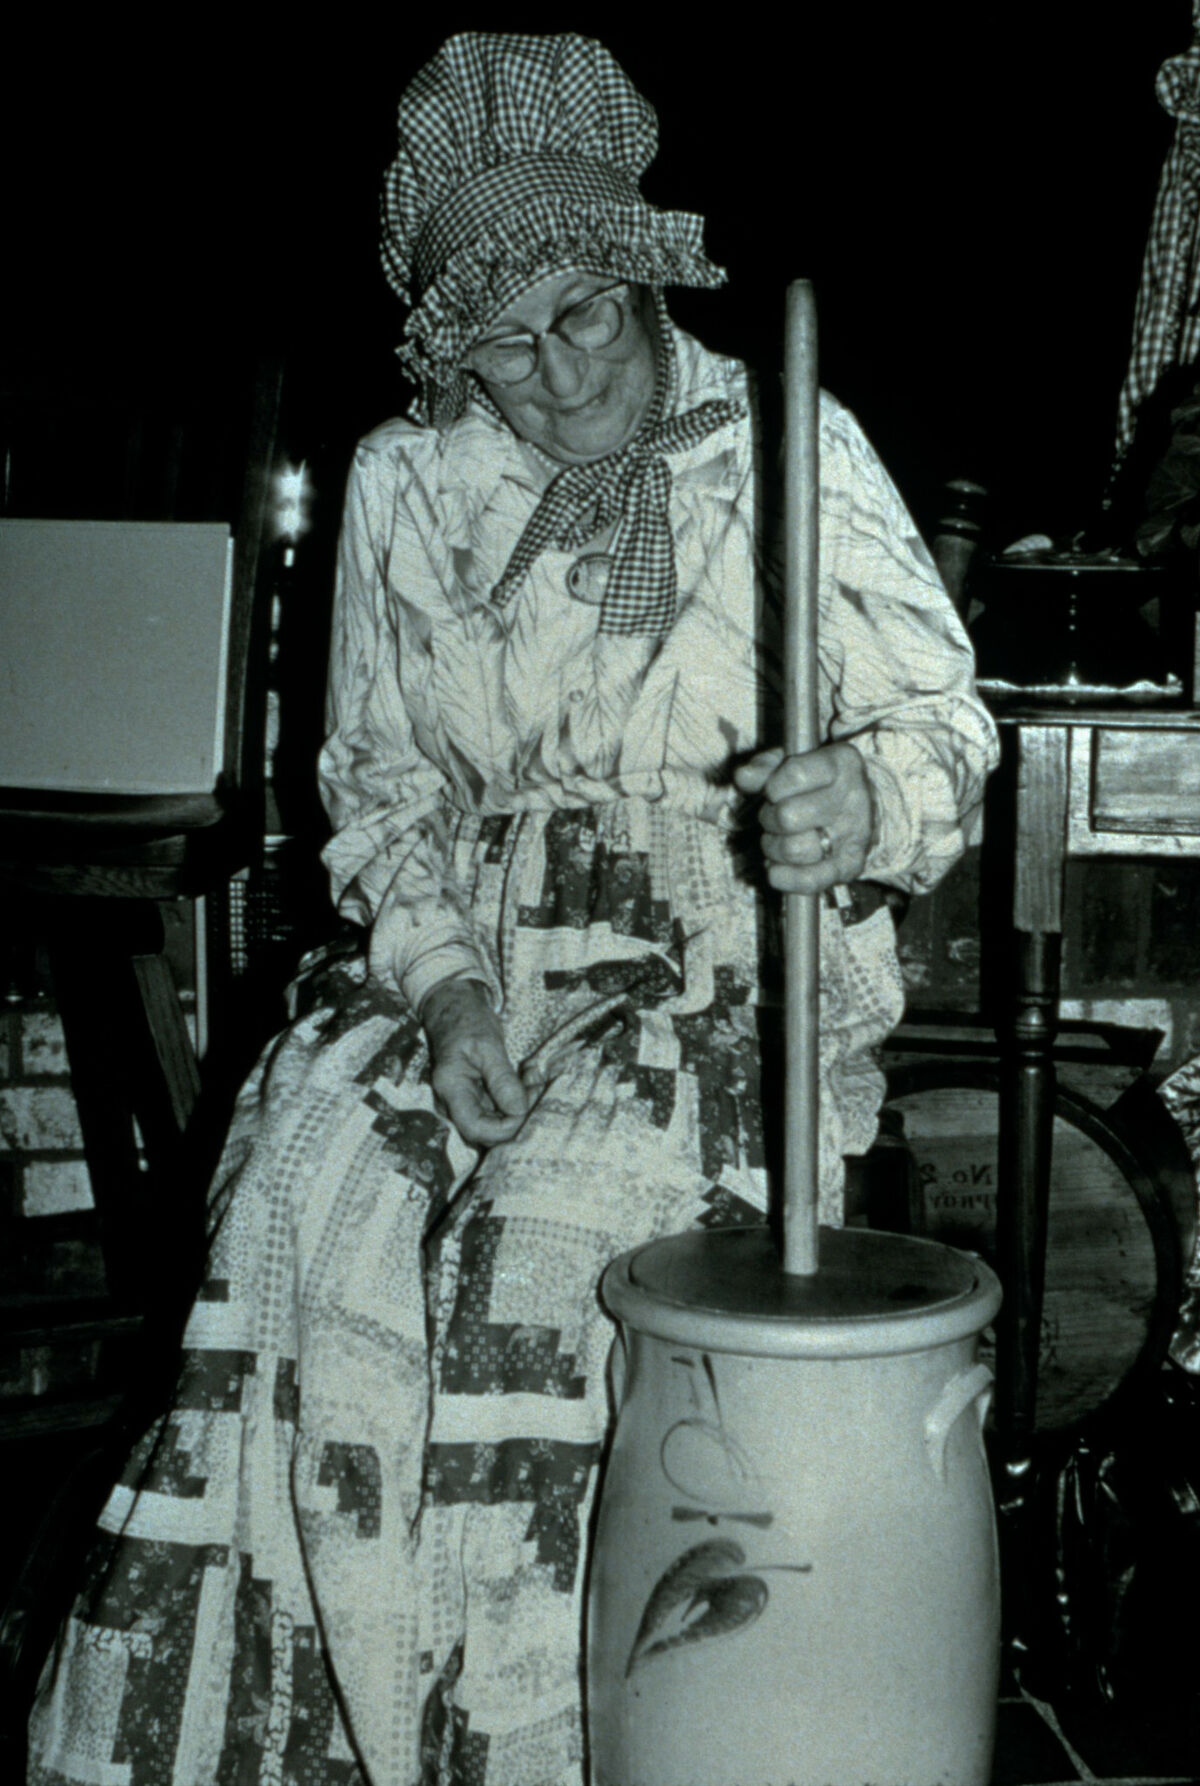 Wearing Janie Tippett’s clothes and hat, good friend Eileen Potter poses with a butter churn from the Wallowa County Museum. Taken by Janie Tippett.